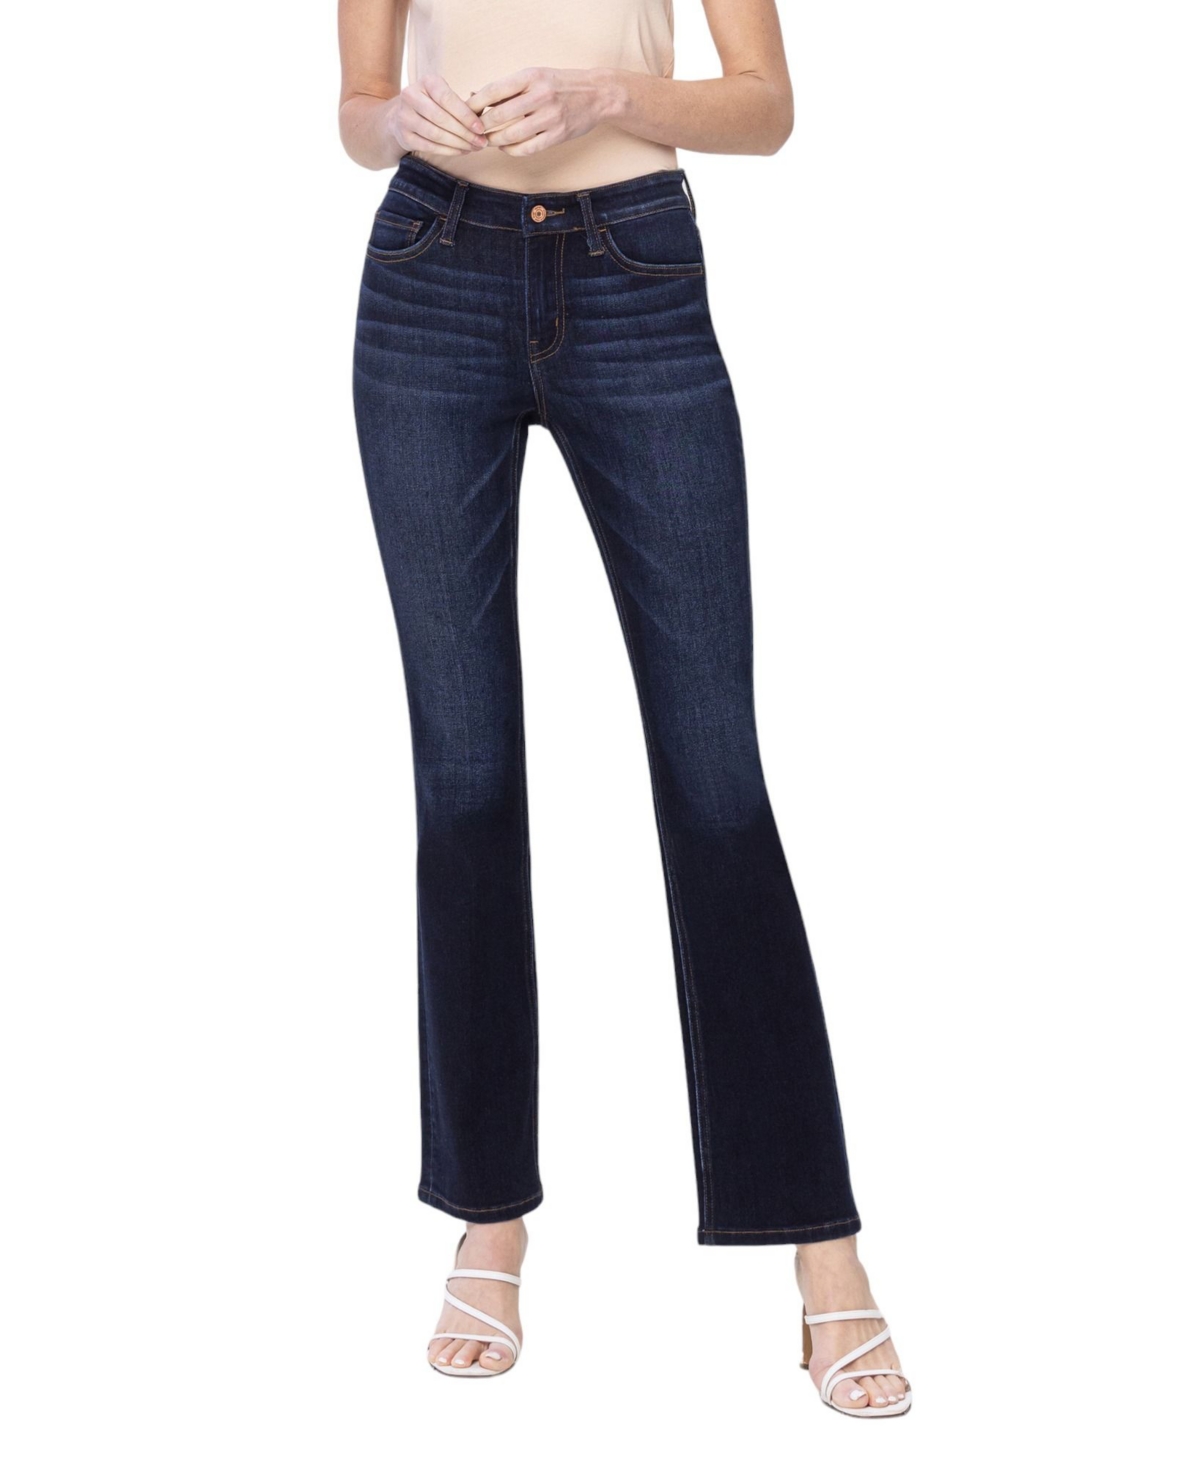 Women's Mid Rise Bootcut Jeans - Amicability blue